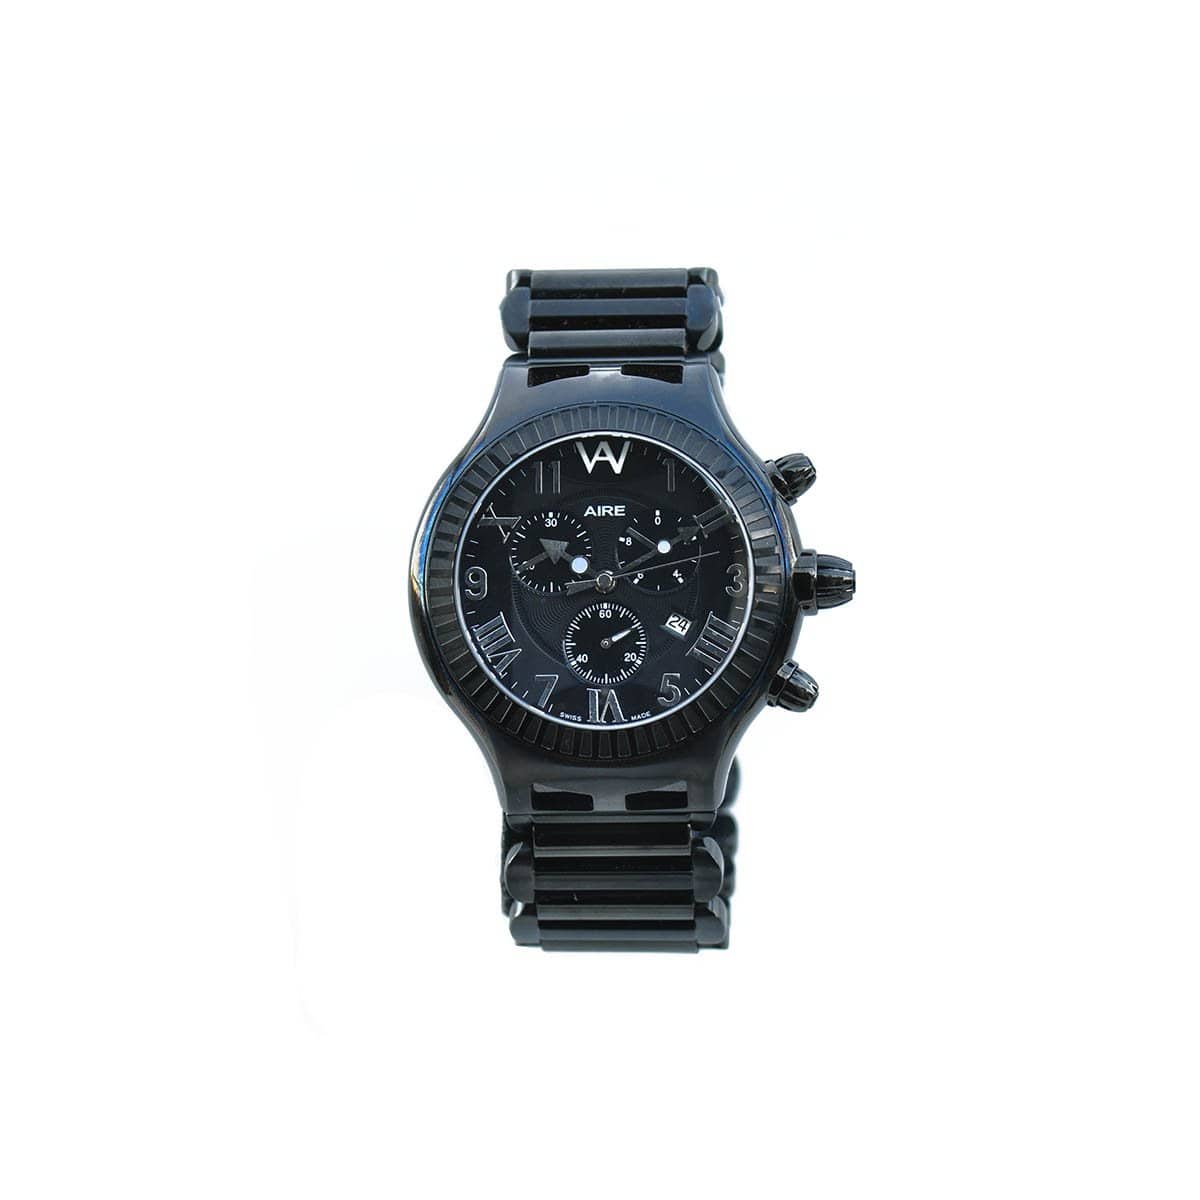 CHRIS AIRE PARLAY CHRONOGRAPH BLACK  WATCH - Chris Aire Fine Jewelry & Timepieces